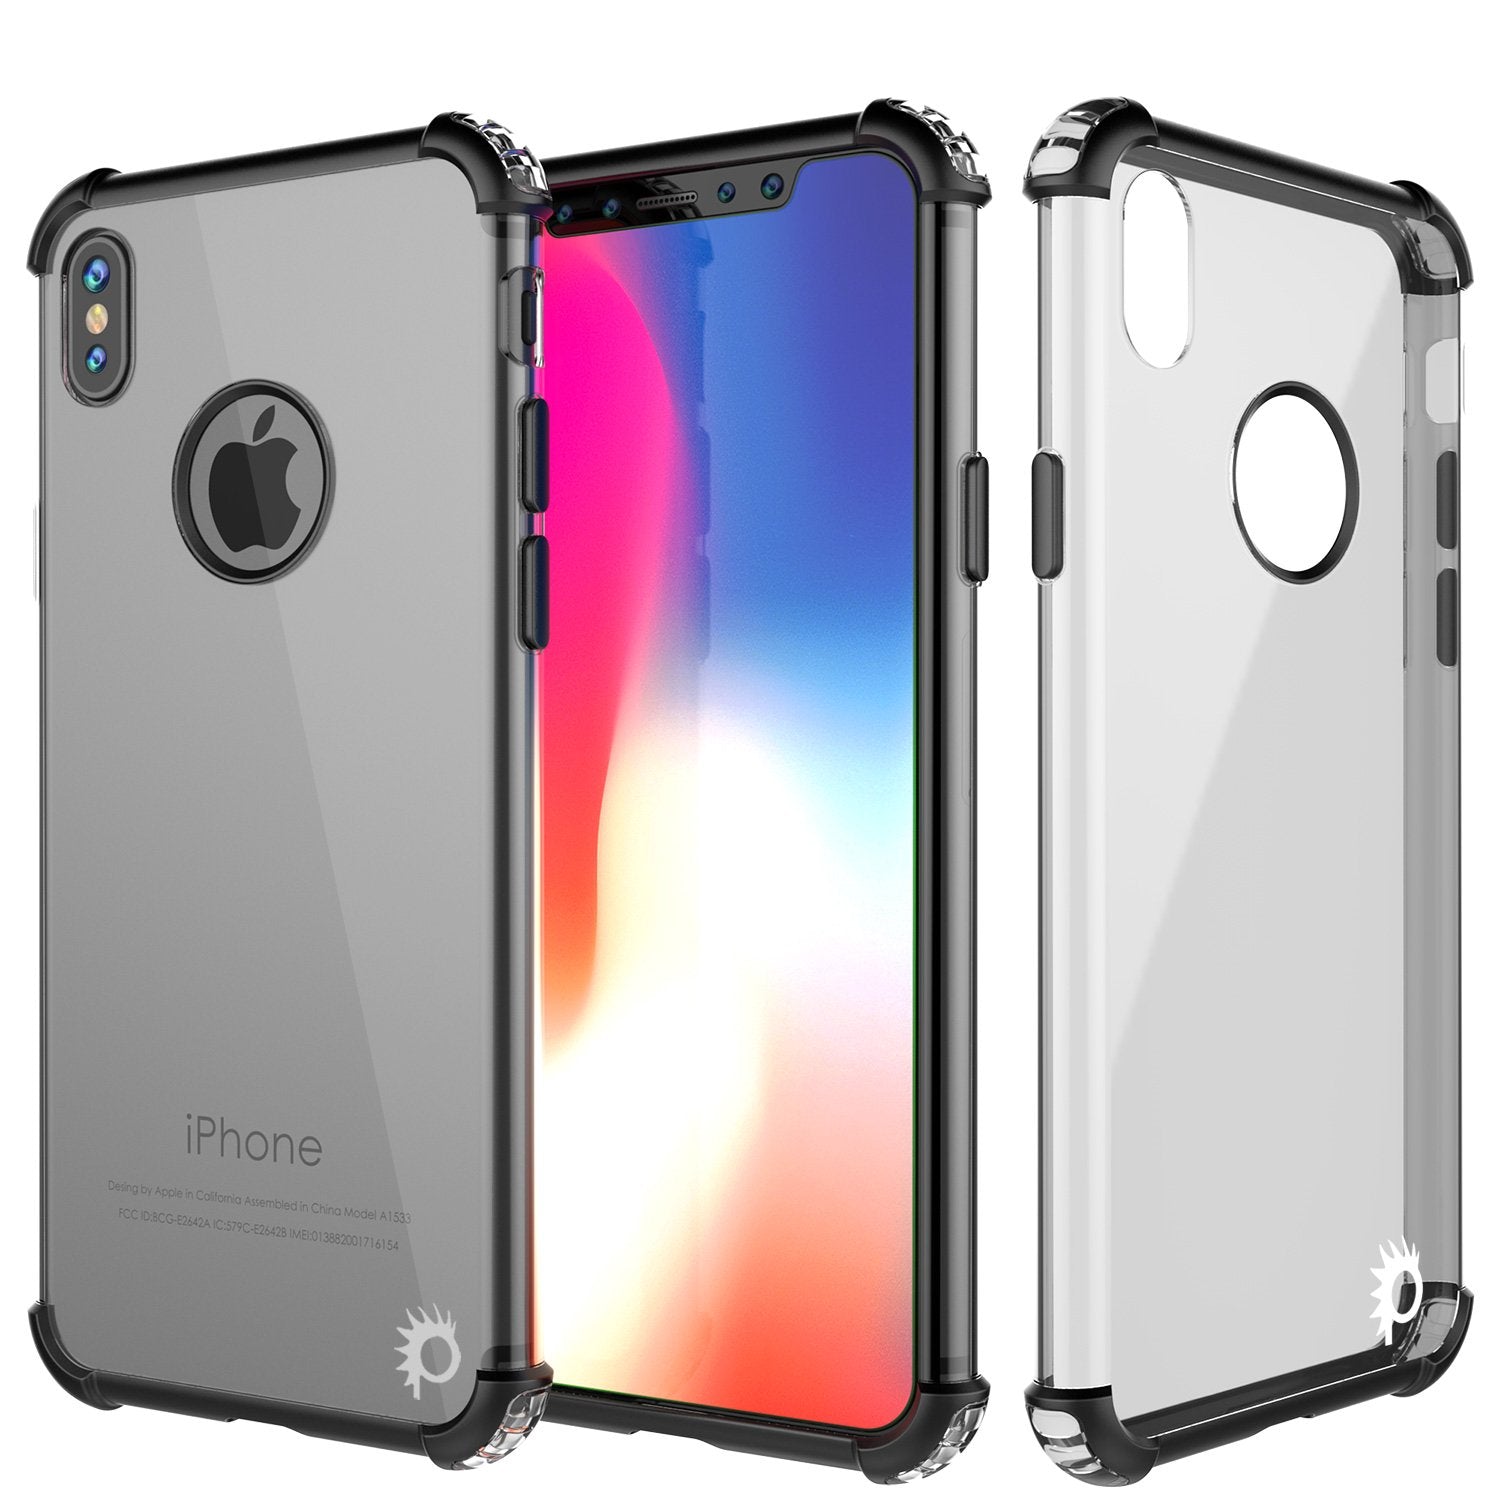 iPhone X Case, Punkcase [BLAZE SERIES] Protective Cover W/ PunkShield Screen Protector [Shockproof] [Slim Fit] for Apple iPhone 10 [Black]